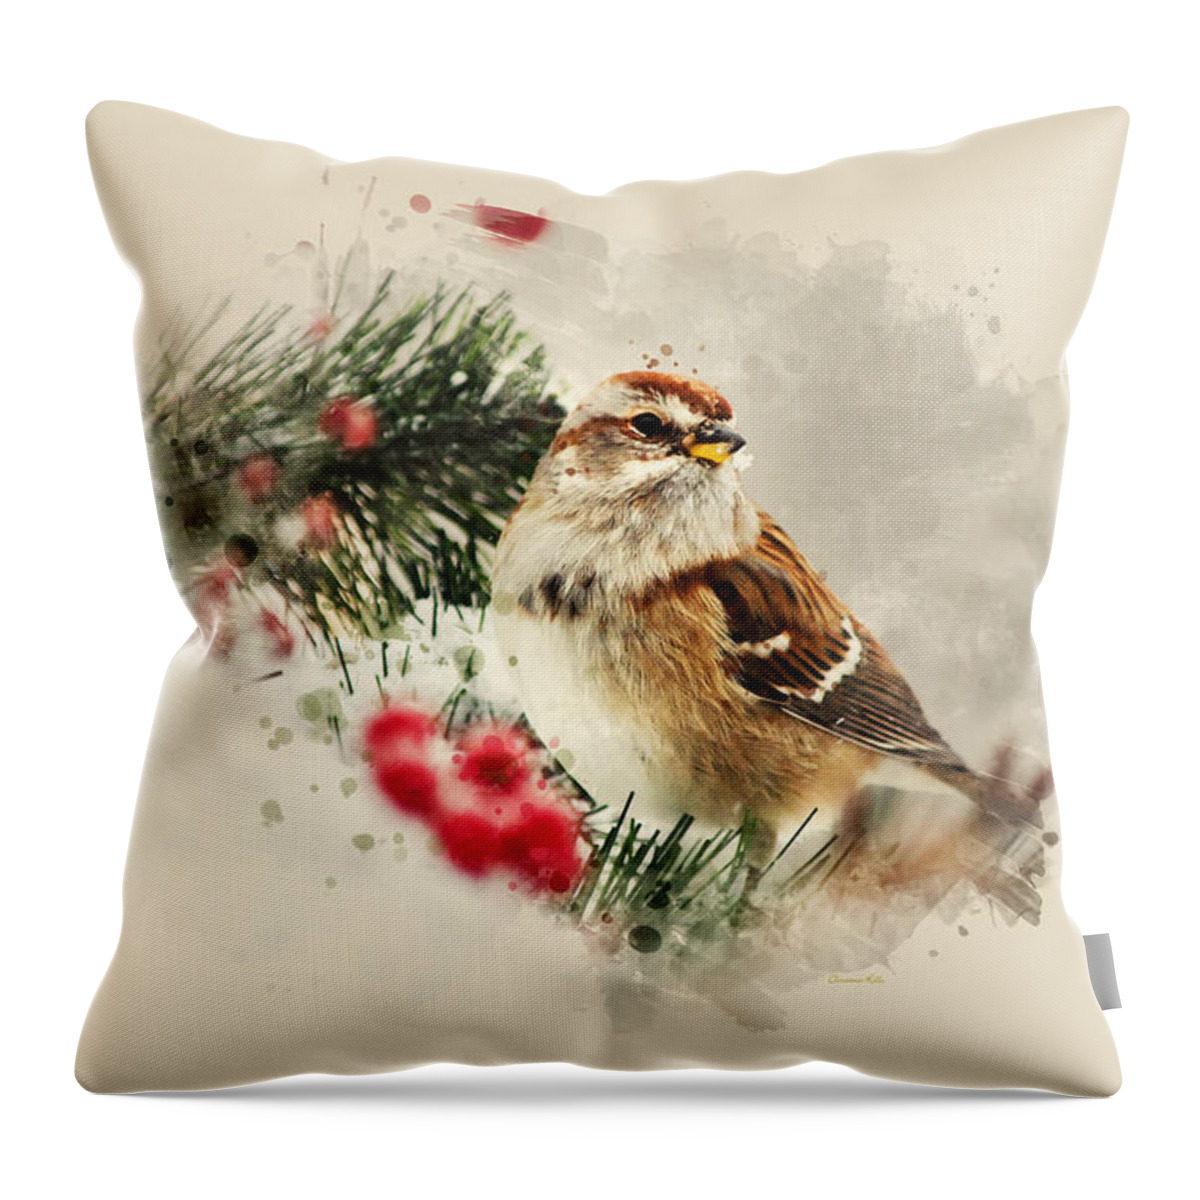 Bird Throw Pillow featuring the mixed media American Tree Sparrow Watercolor Art by Christina Rollo